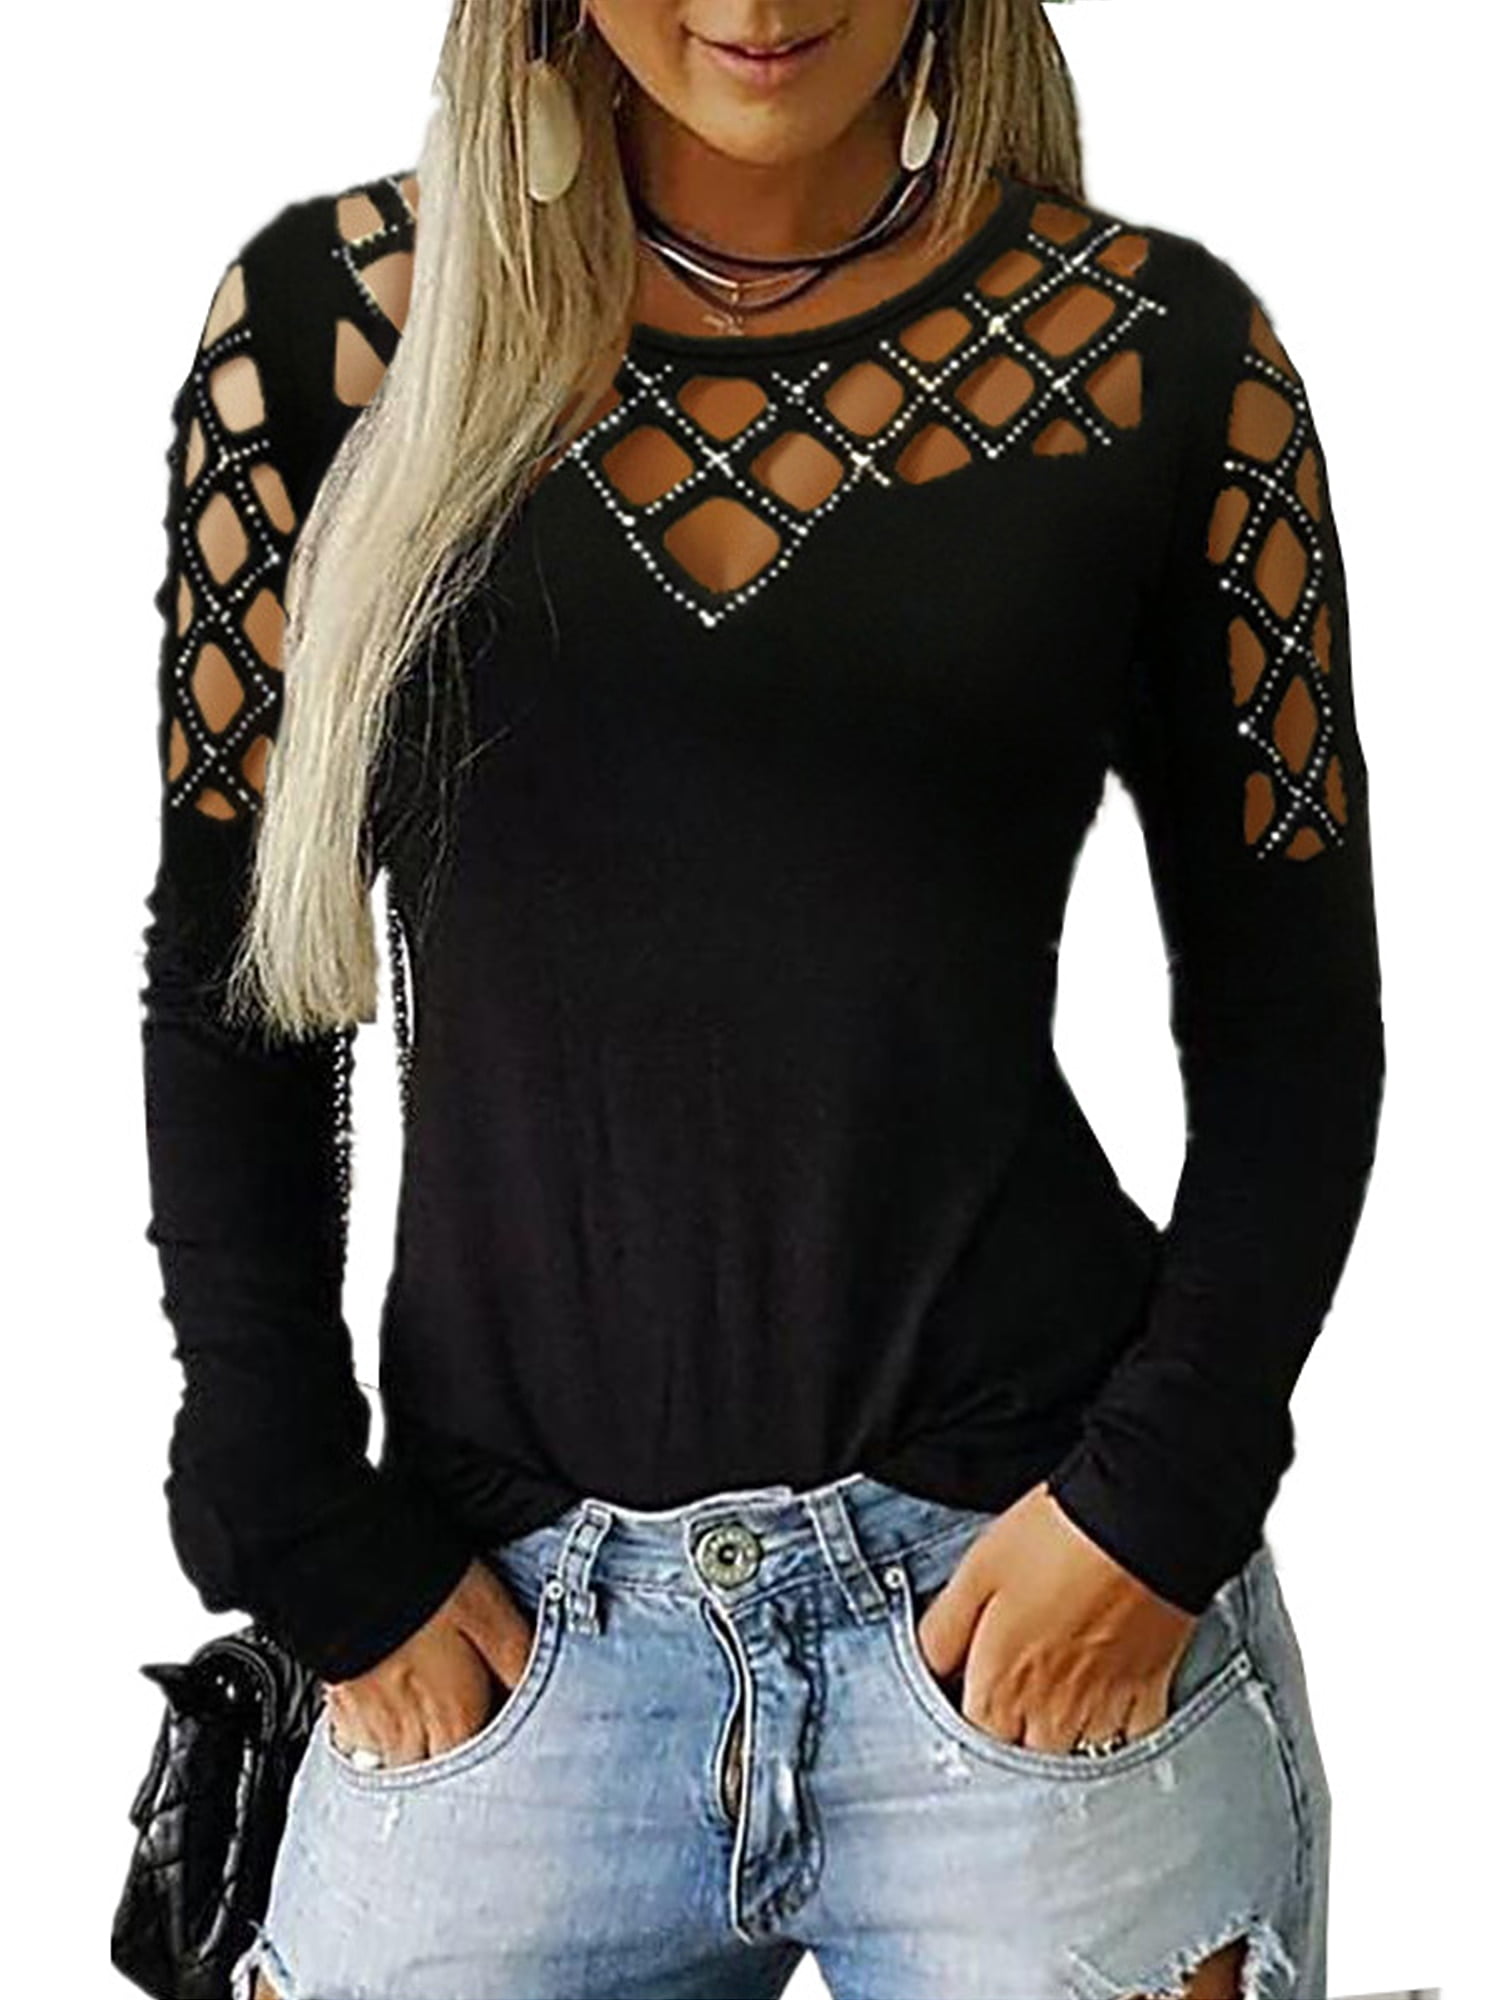 Long Sleeve Deep V Neck Strappy Lace Up Colorblock Pullover Sweatshirt T-Shirt Tee Top Black White